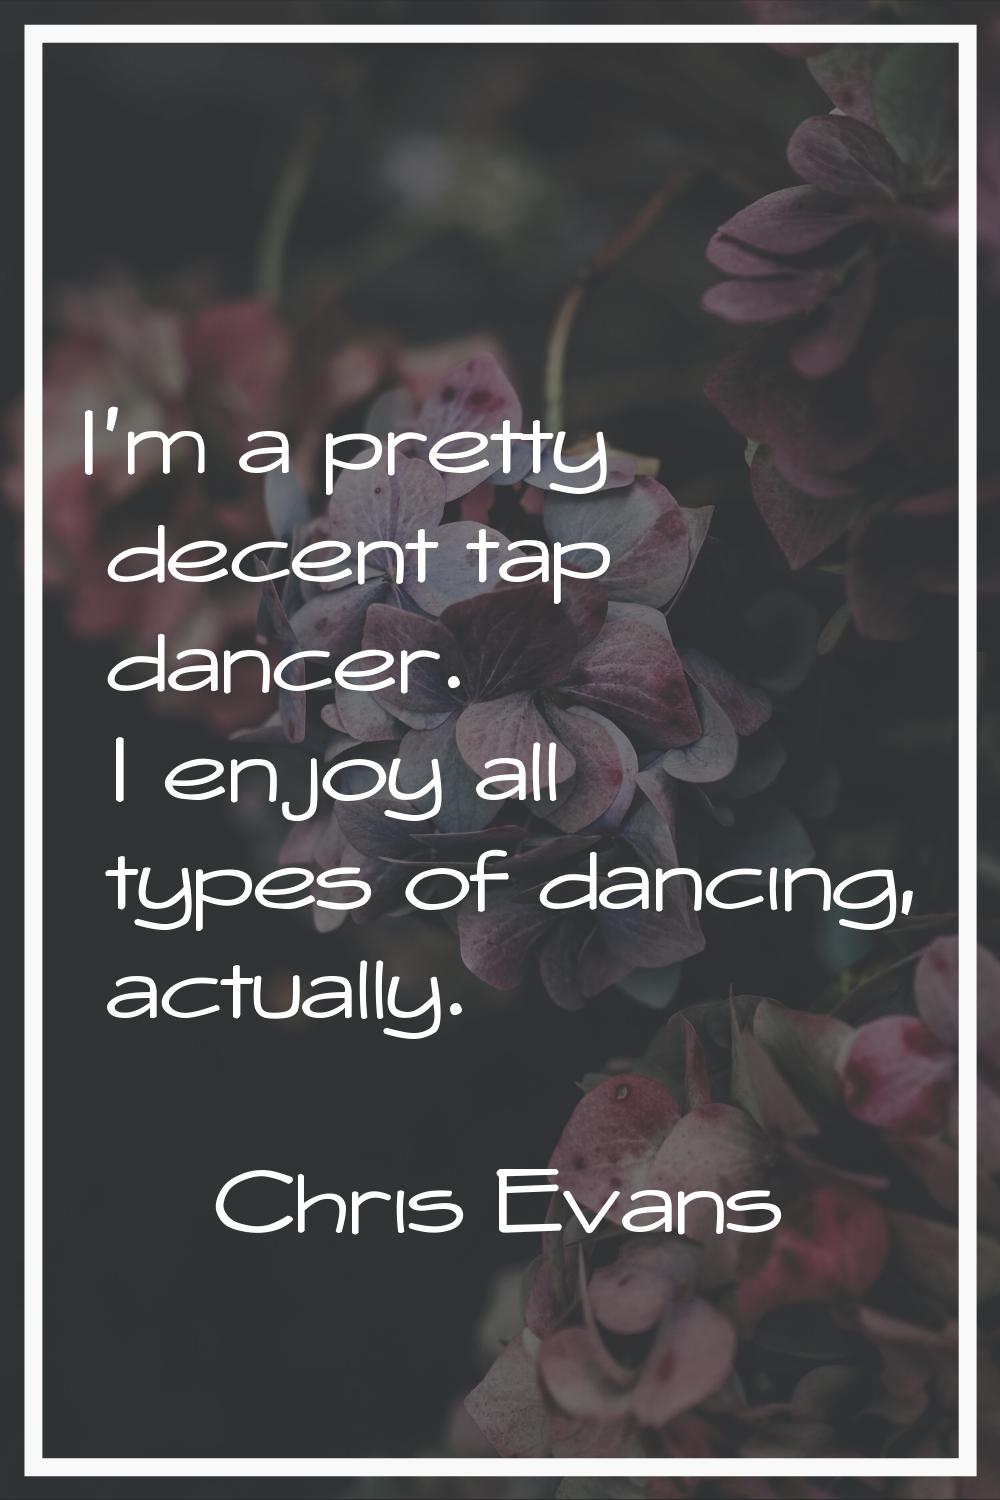 I'm a pretty decent tap dancer. I enjoy all types of dancing, actually.